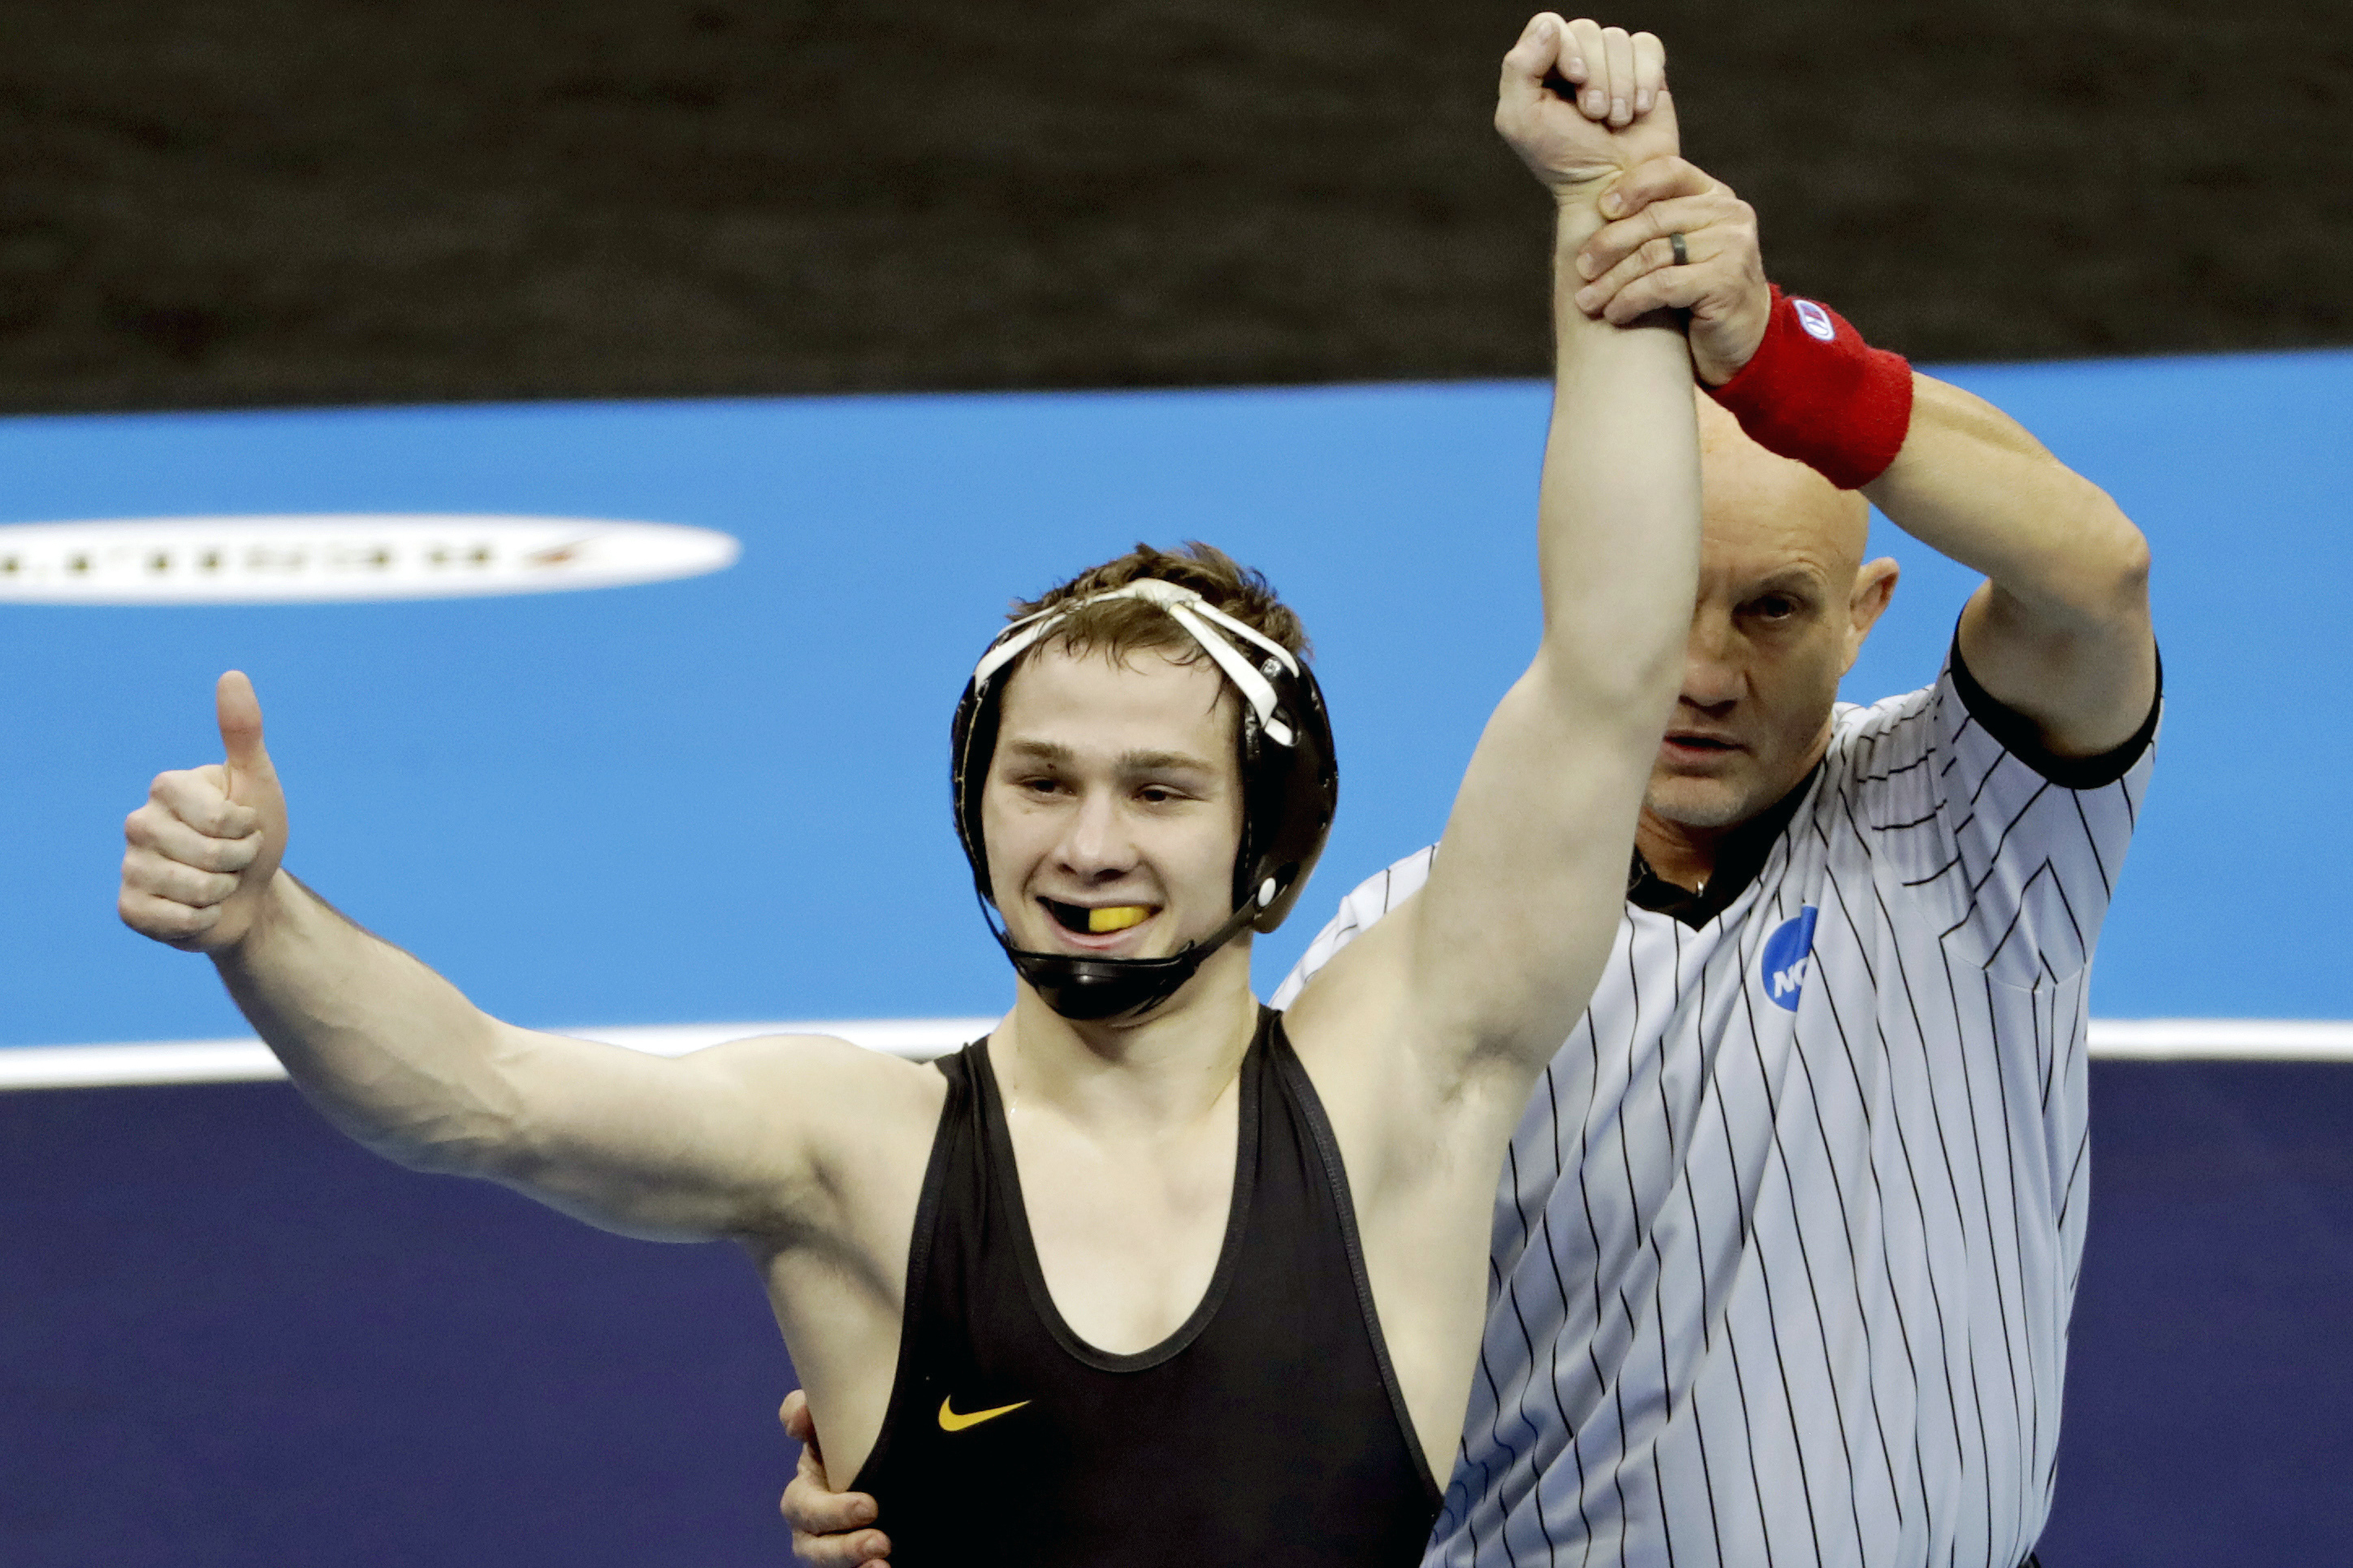 NCAA Wrestling Championships 2023 FREE LIVE STREAM (3/16/23) Time, TV, channel, streaming info for NCAA wrestling tournament in Tulsa